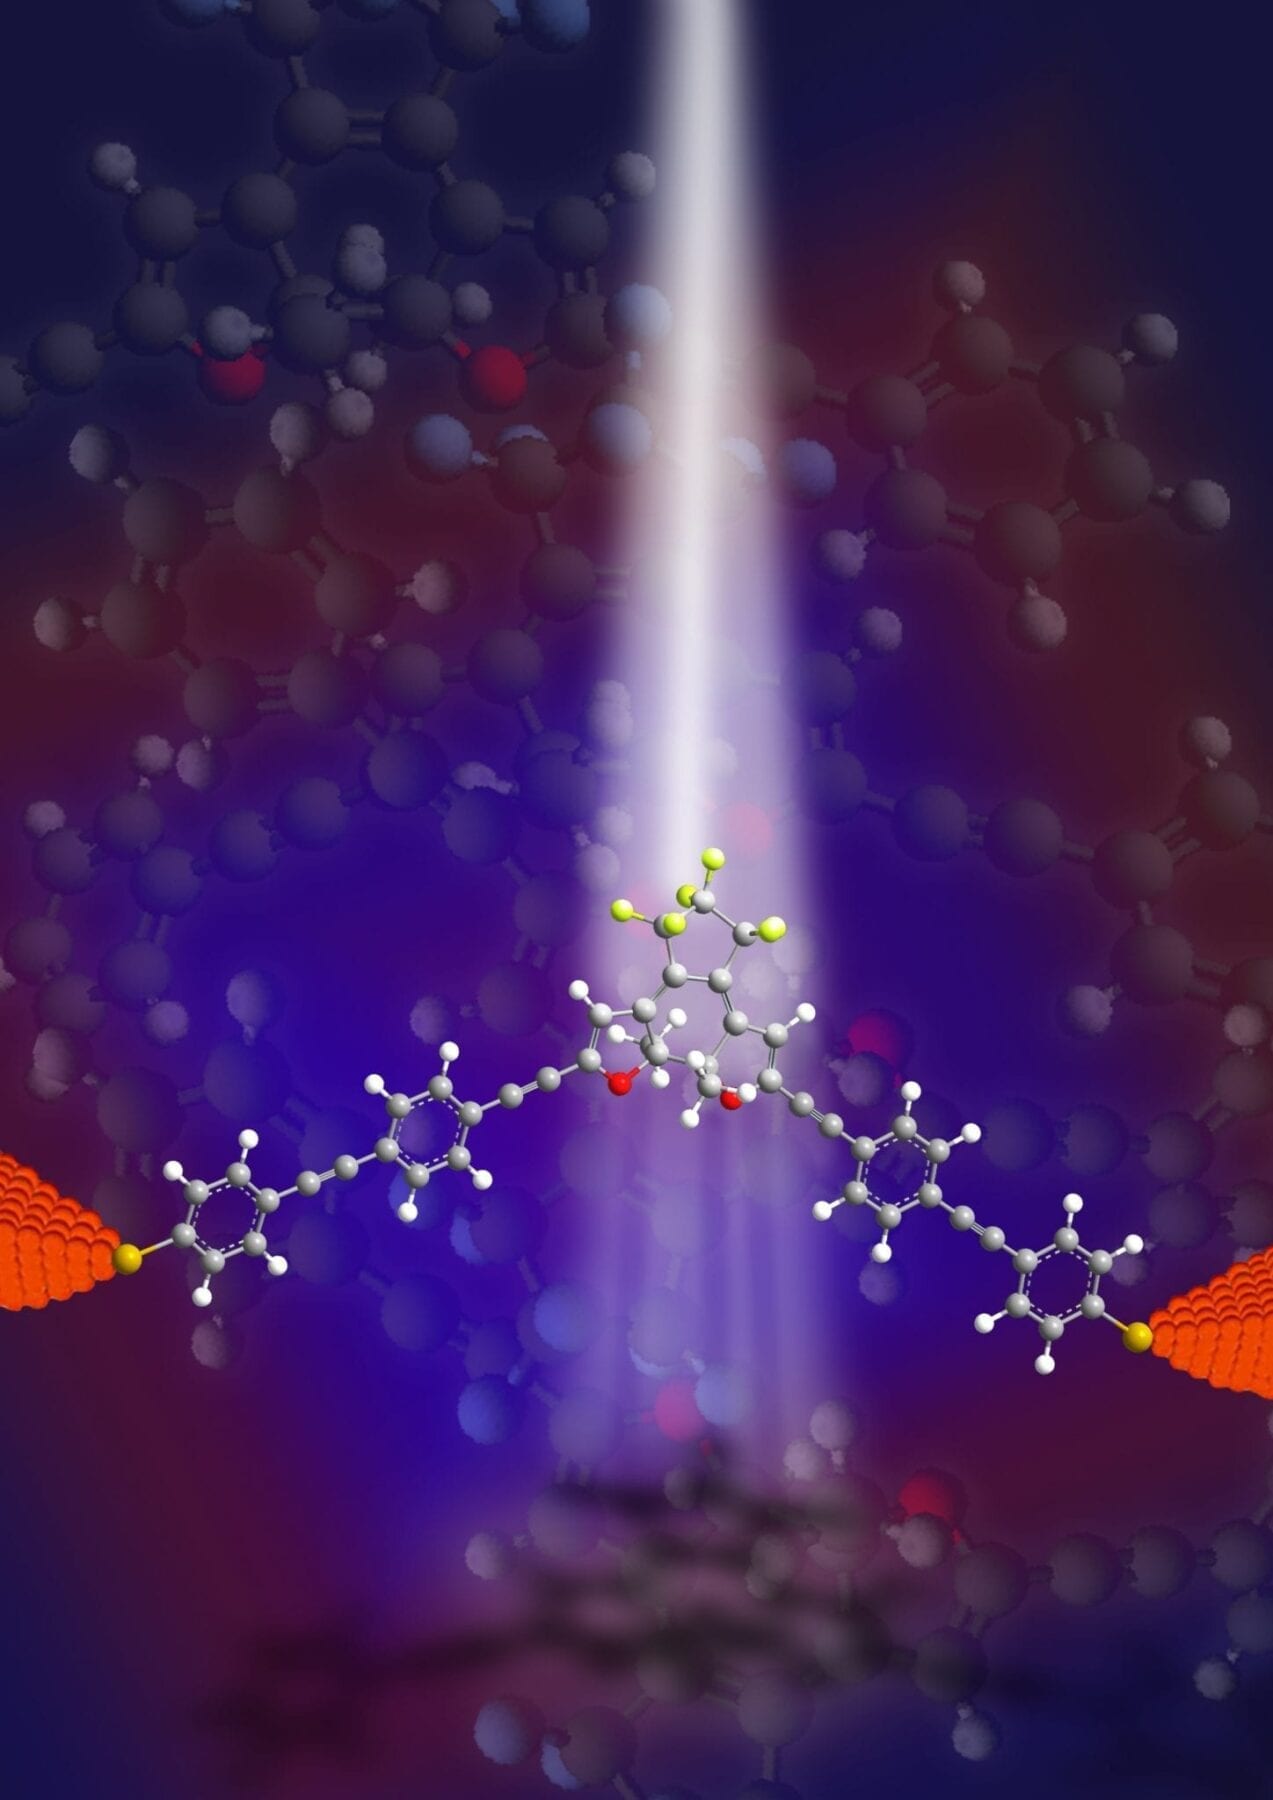 Researchers from Konstanz and Dresden succeed in light-controlled molecule switching